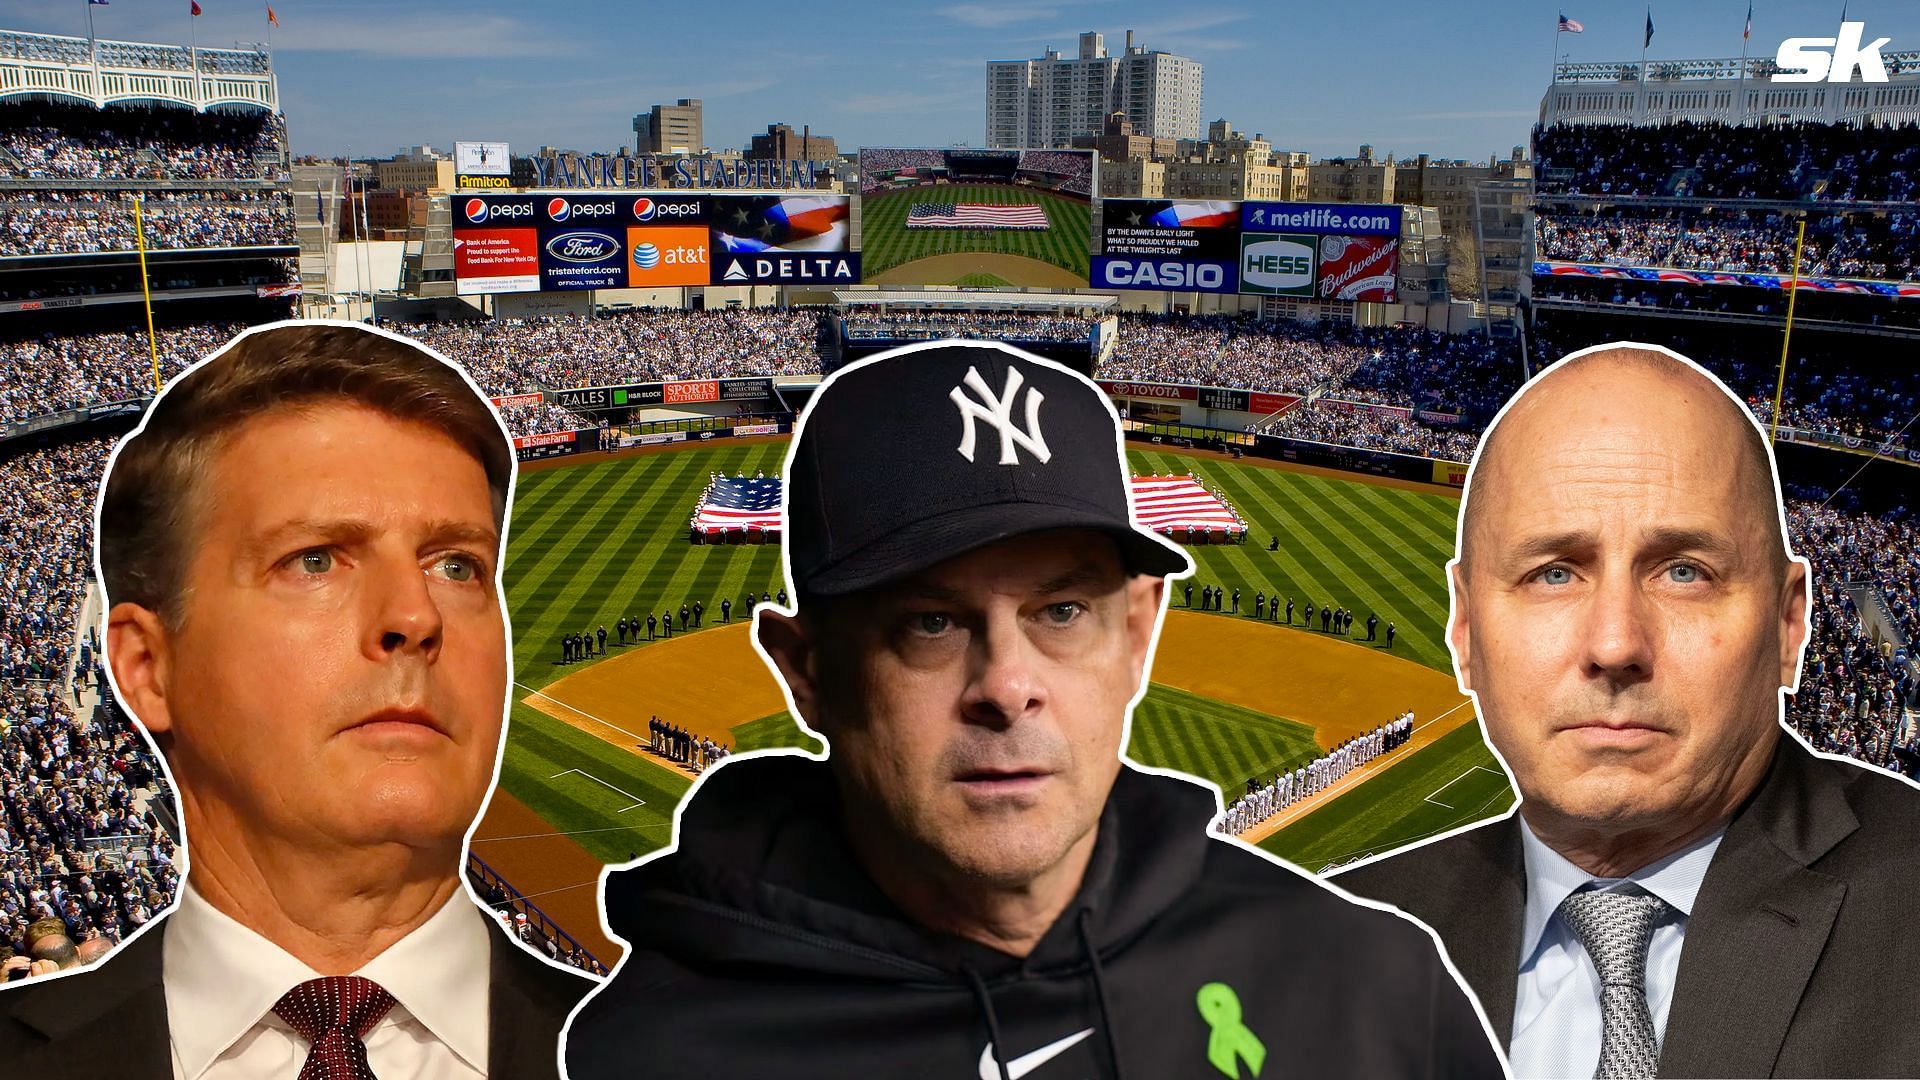 Hal Steinbrenner announced that the New York Yankees will undergo some changes this offseason